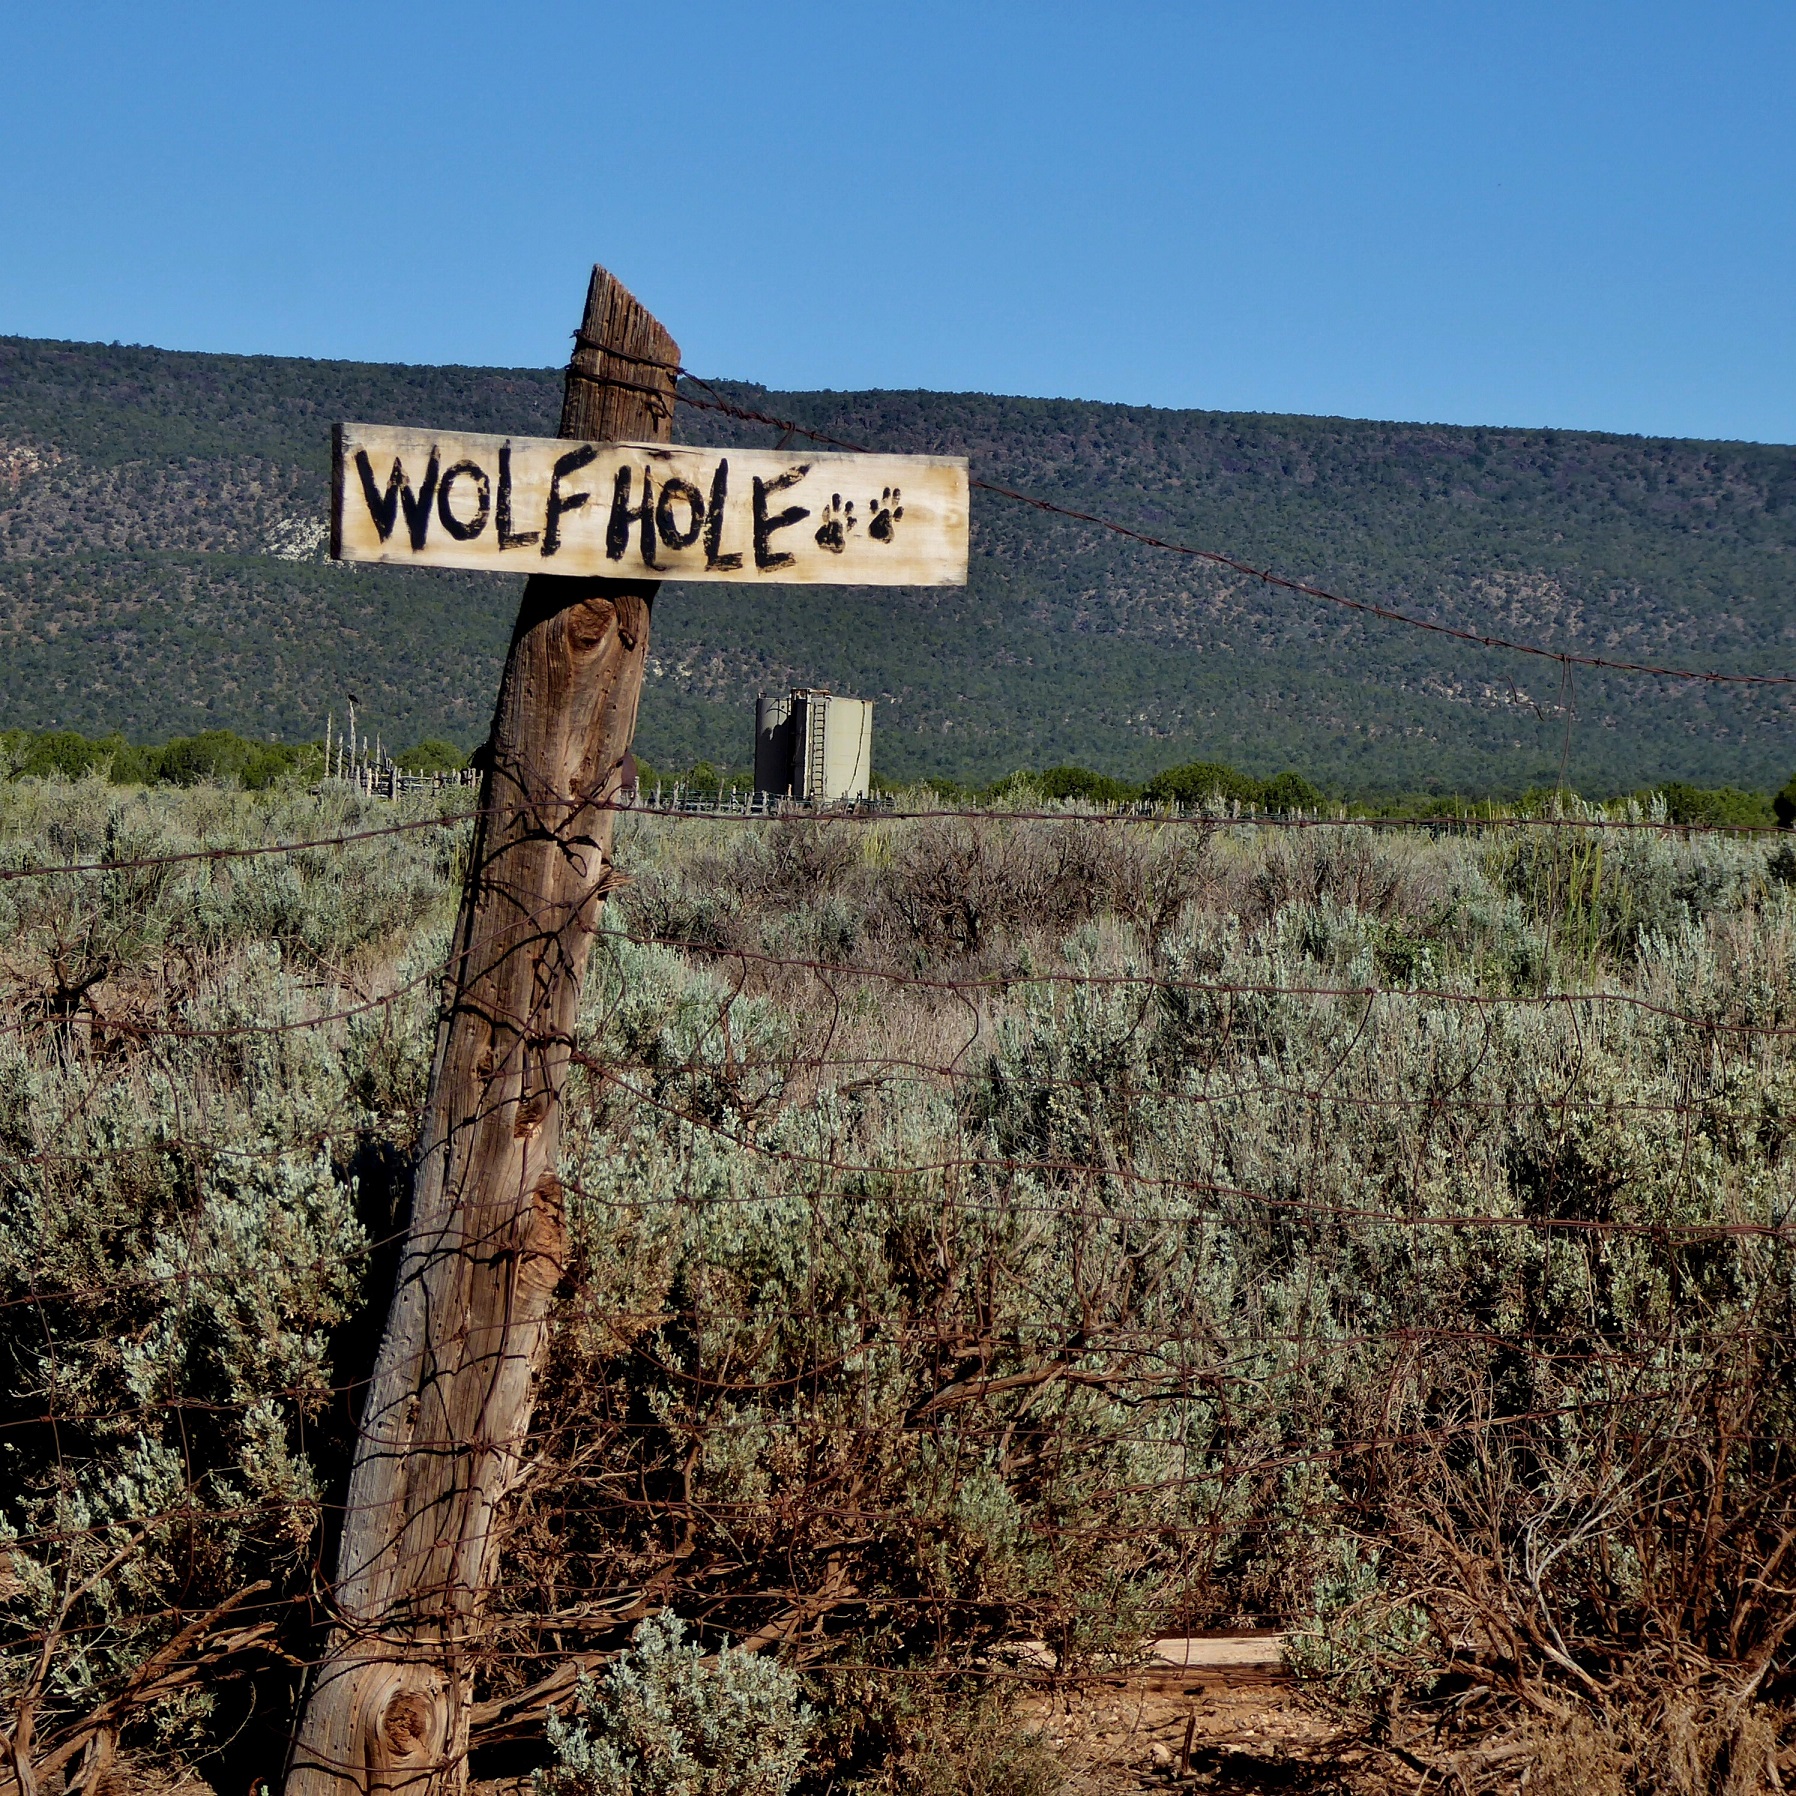 The Wolf Hole sign with a water tank in the background